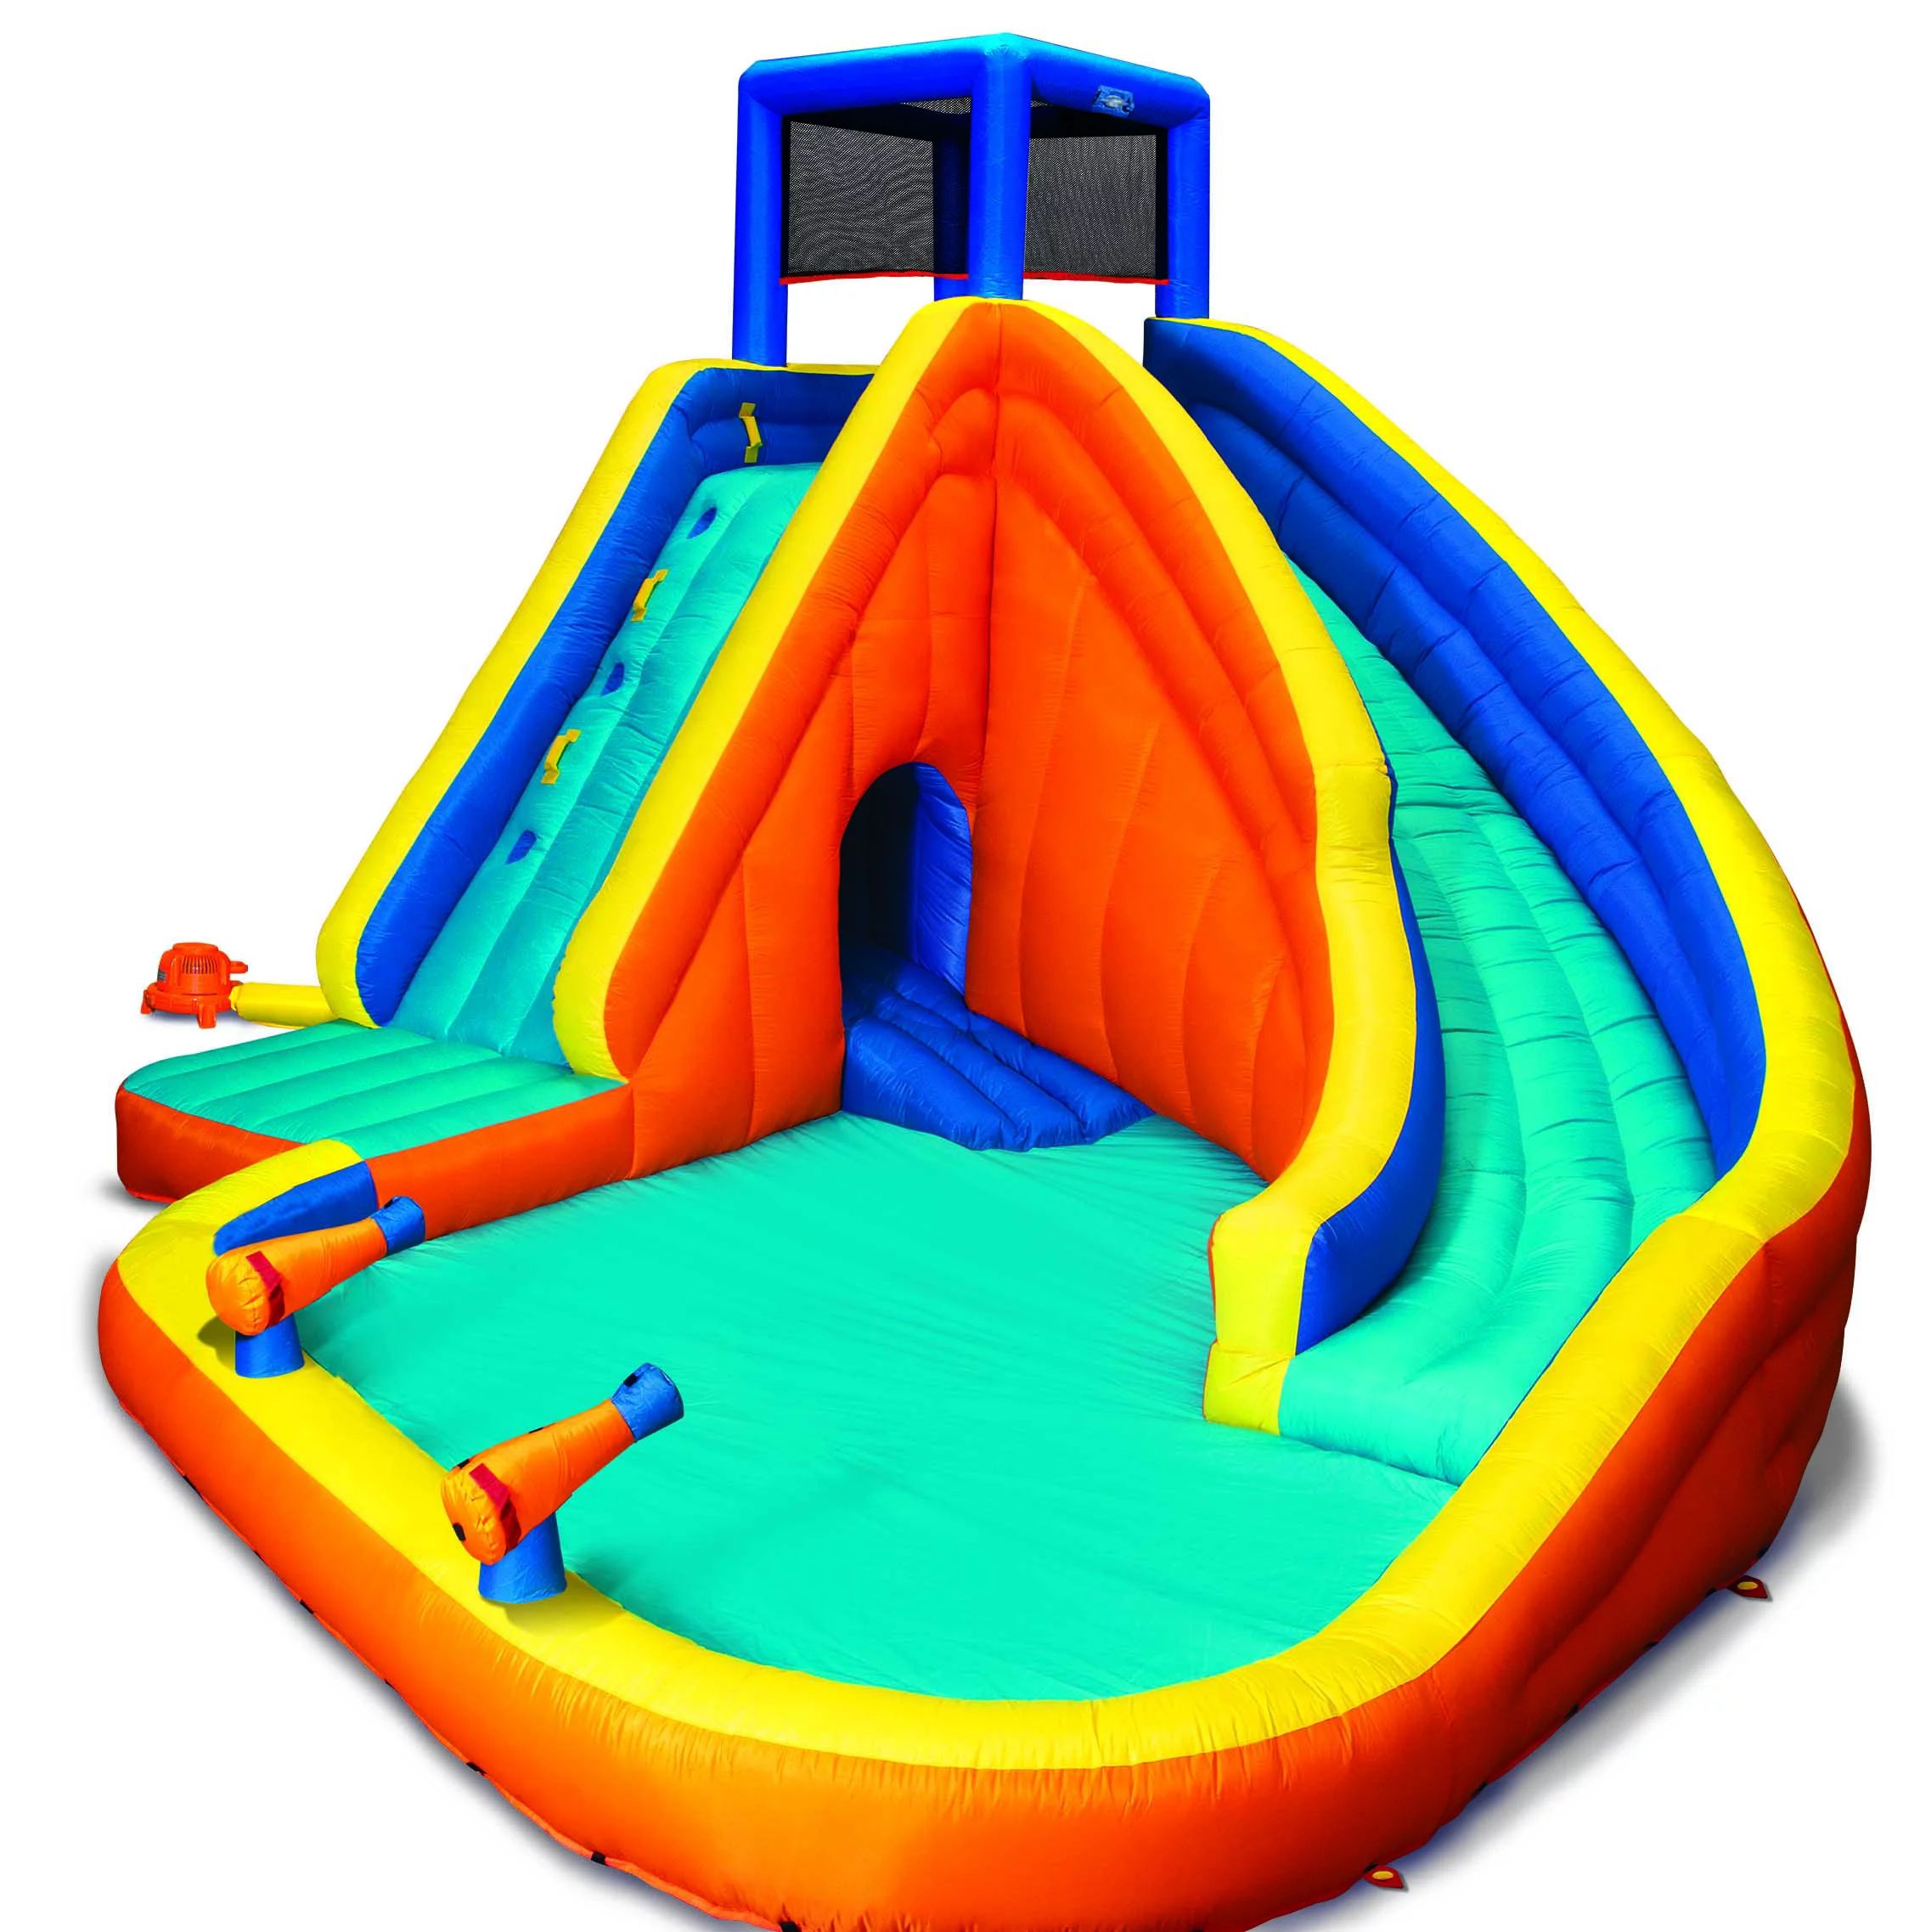 Banzai Sidewinder Falls Inflatable Water Park Play Pool Slide with Water Cannons | Walmart (US)